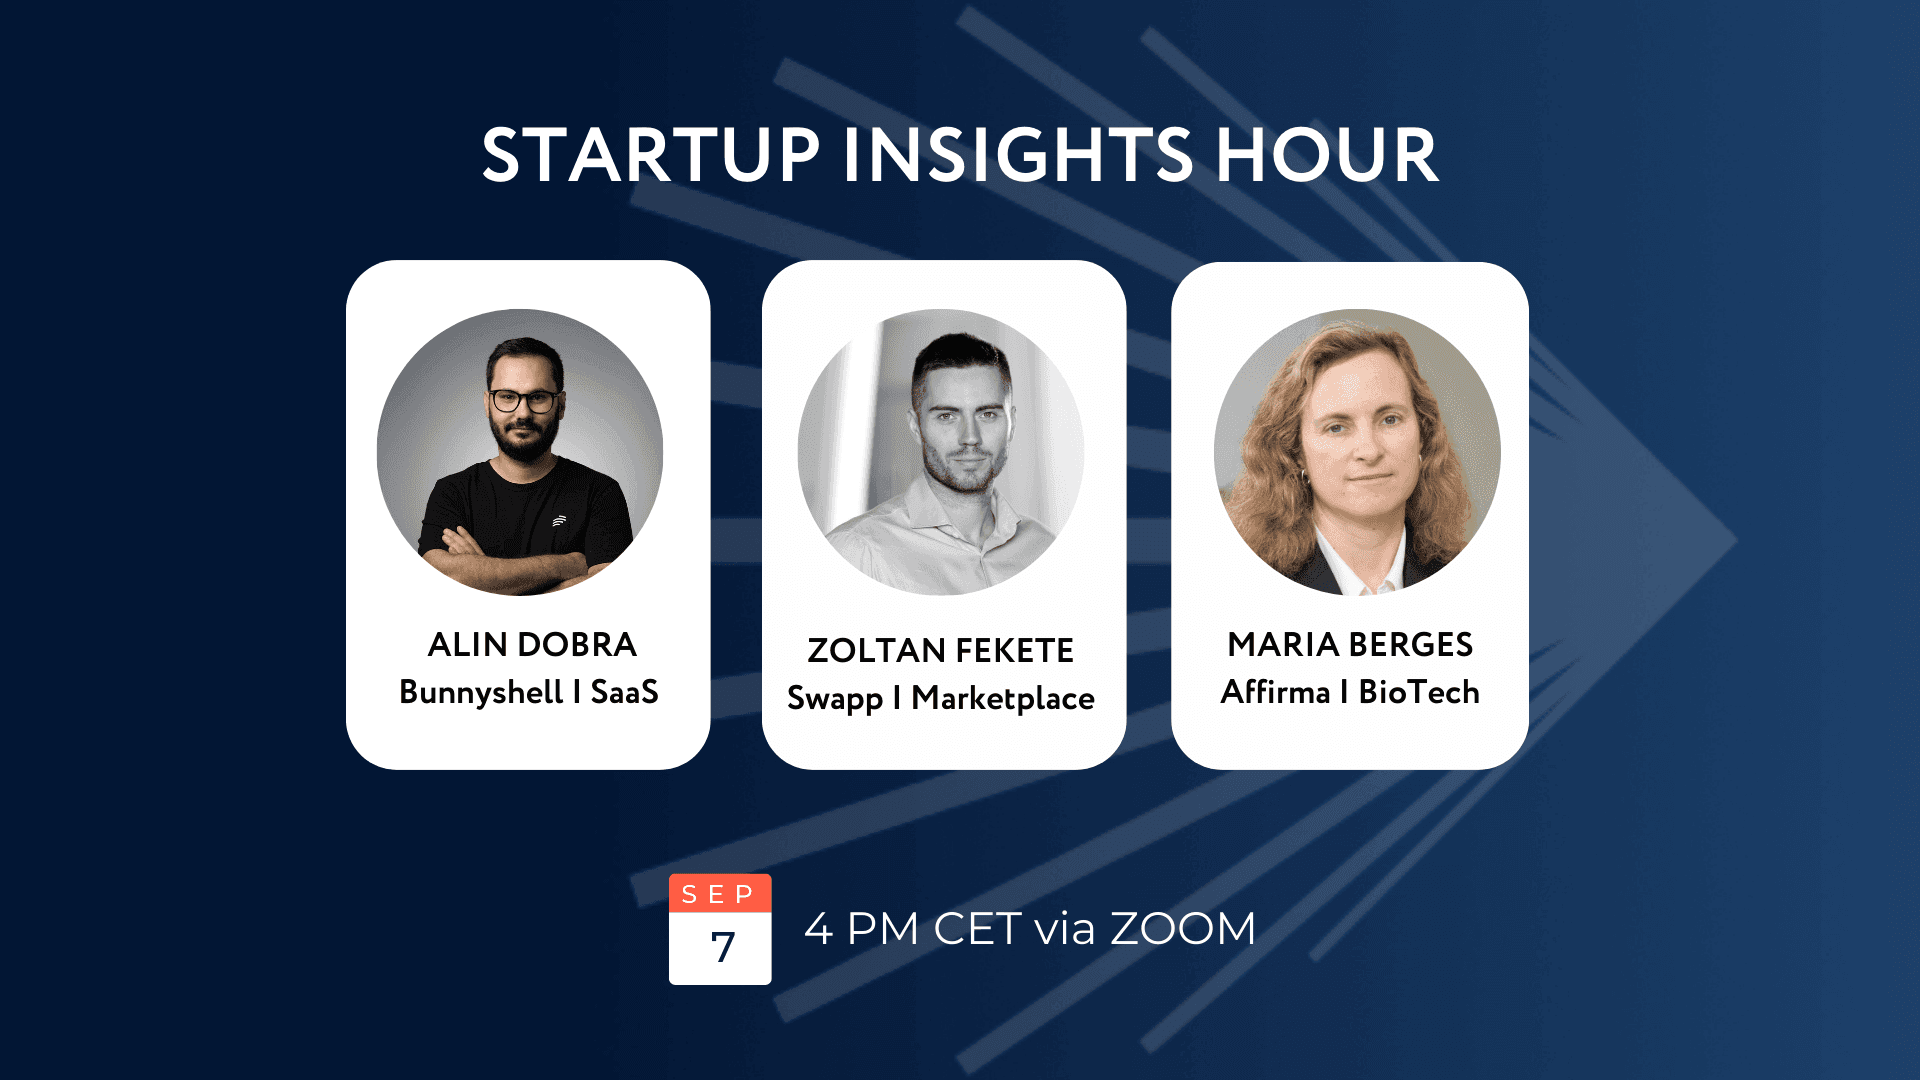 Sign up for the next Startup Insights Hour Pitching event on September 7. 